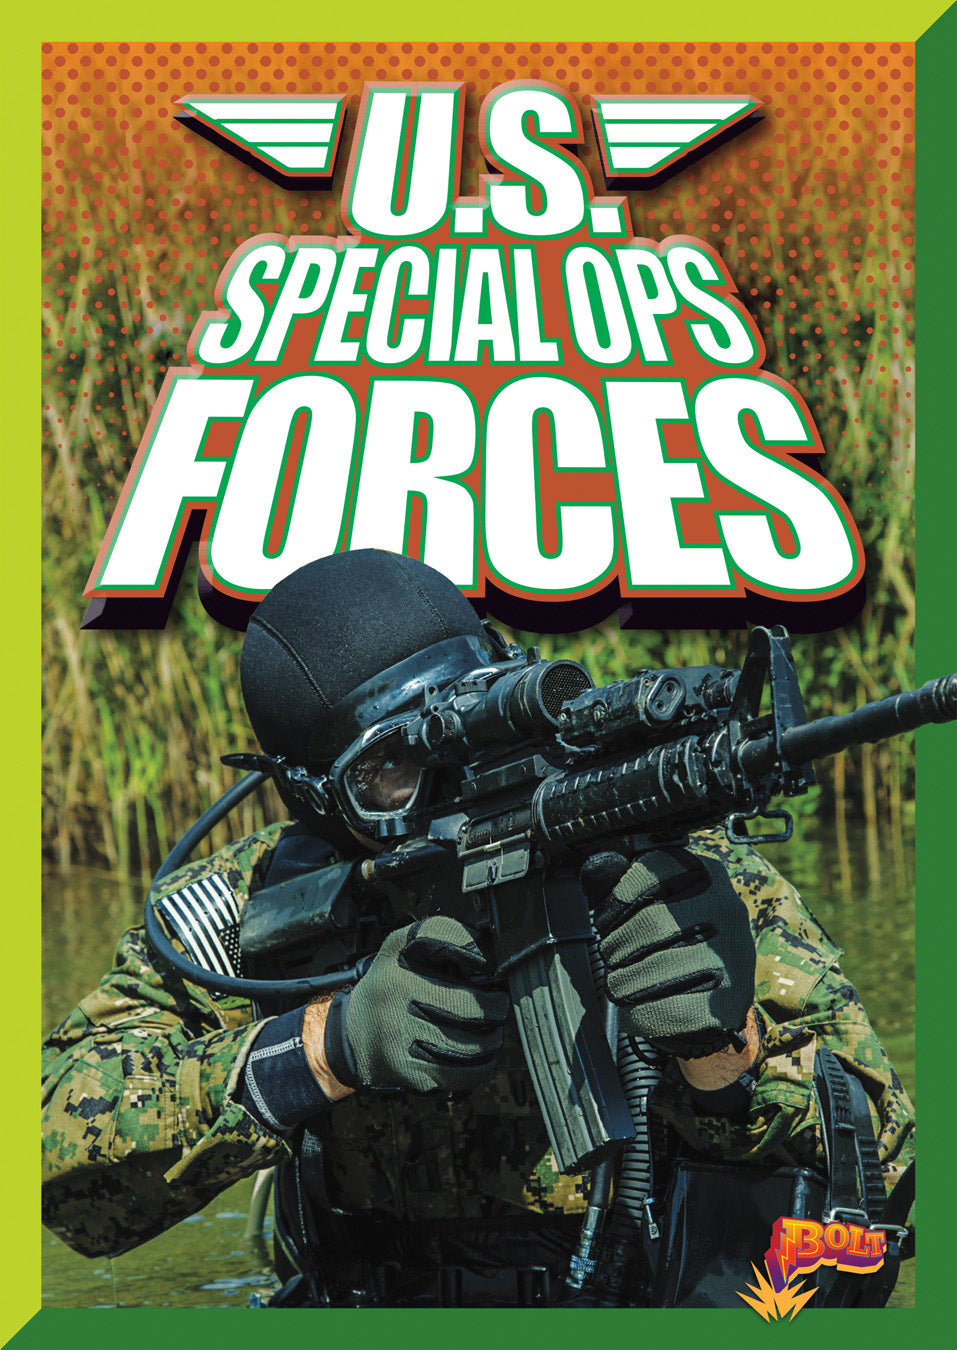 U.S. Military Forces: U.S. Special Ops Forces